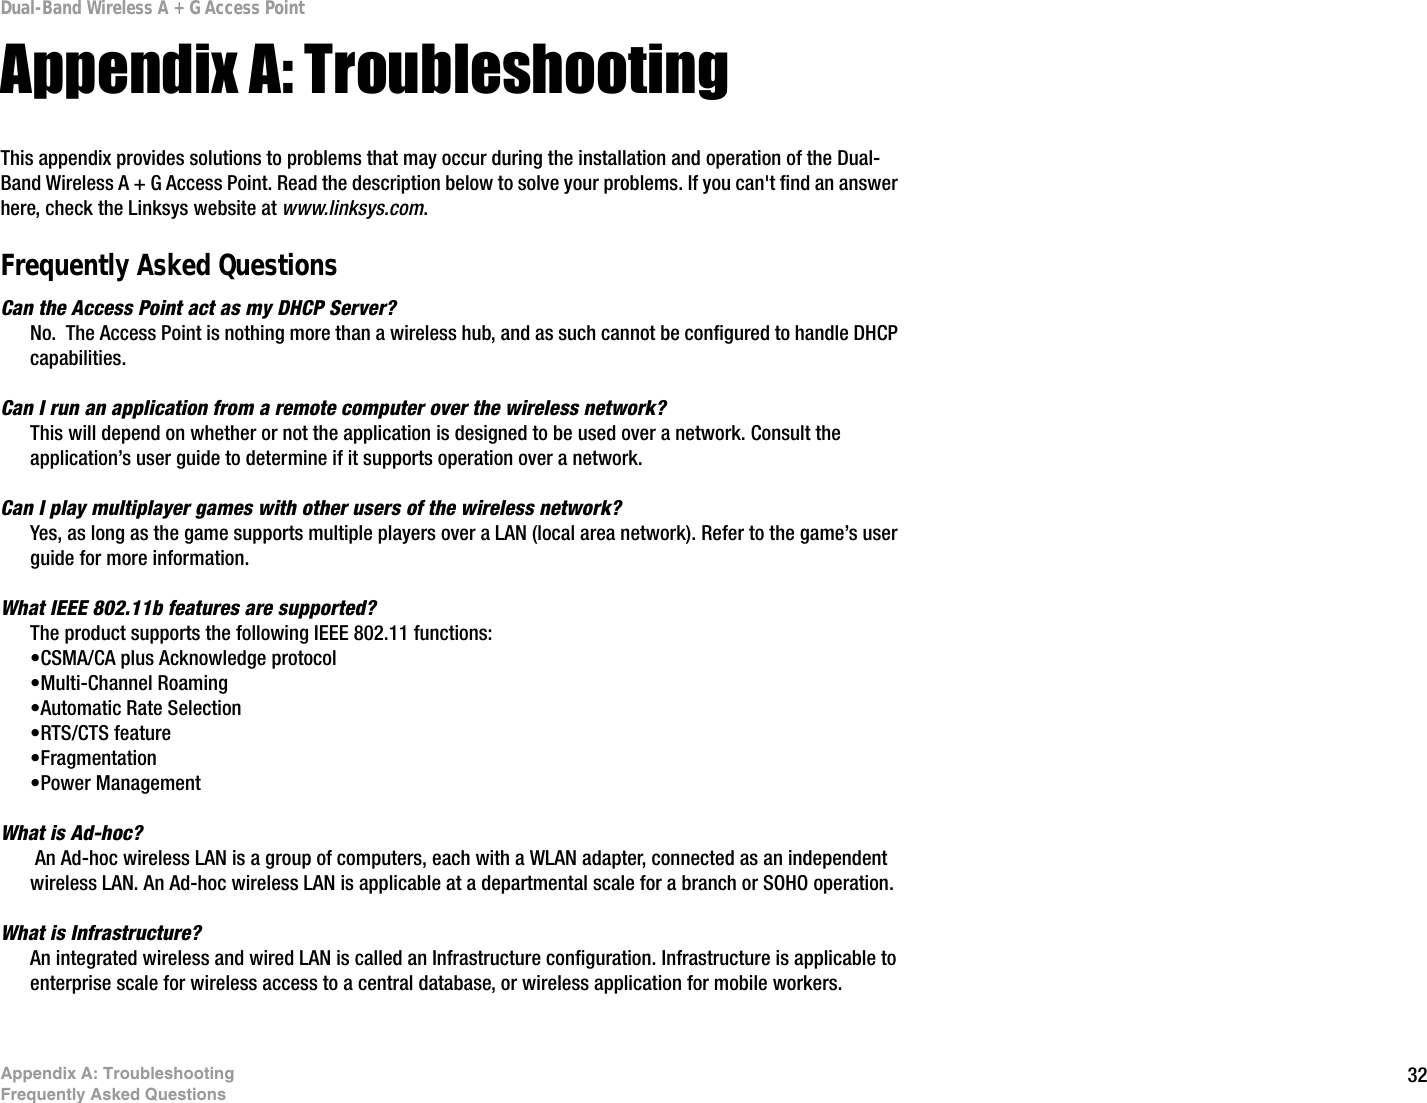 32Appendix A: TroubleshootingFrequently Asked QuestionsDual-Band Wireless A + G Access PointAppendix A: TroubleshootingThis appendix provides solutions to problems that may occur during the installation and operation of the Dual-Band Wireless A + G Access Point. Read the description below to solve your problems. If you can&apos;t find an answer here, check the Linksys website at www.linksys.com.Frequently Asked QuestionsCan the Access Point act as my DHCP Server?No.  The Access Point is nothing more than a wireless hub, and as such cannot be configured to handle DHCP capabilities.Can I run an application from a remote computer over the wireless network?This will depend on whether or not the application is designed to be used over a network. Consult the application’s user guide to determine if it supports operation over a network.Can I play multiplayer games with other users of the wireless network?Yes, as long as the game supports multiple players over a LAN (local area network). Refer to the game’s user guide for more information.What IEEE 802.11b features are supported?The product supports the following IEEE 802.11 functions: •CSMA/CA plus Acknowledge protocol •Multi-Channel Roaming •Automatic Rate Selection •RTS/CTS feature •Fragmentation •Power Management What is Ad-hoc? An Ad-hoc wireless LAN is a group of computers, each with a WLAN adapter, connected as an independent wireless LAN. An Ad-hoc wireless LAN is applicable at a departmental scale for a branch or SOHO operation.What is Infrastructure?An integrated wireless and wired LAN is called an Infrastructure configuration. Infrastructure is applicable to enterprise scale for wireless access to a central database, or wireless application for mobile workers. 